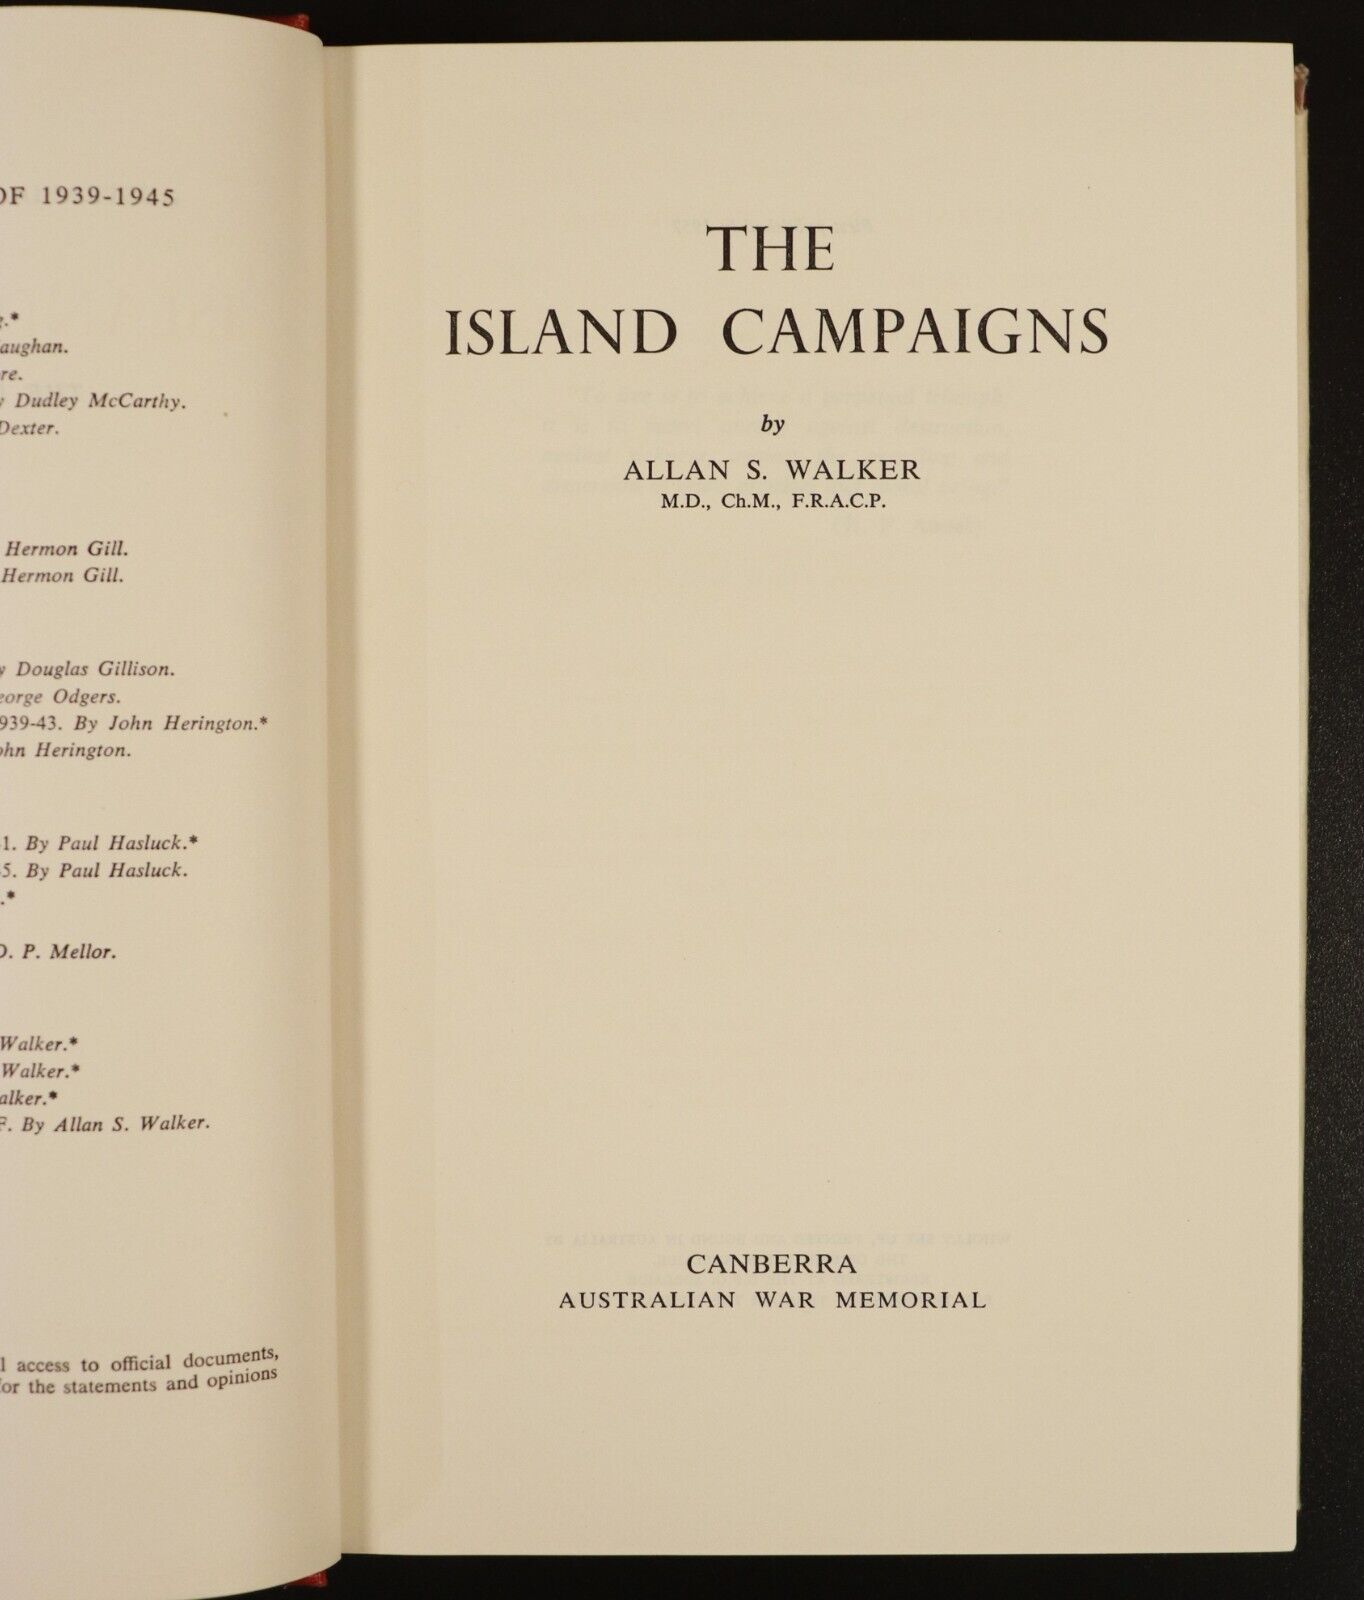 1959 The Island Campaigns by A.S. Walker Australia In WW2 Book Medical Series